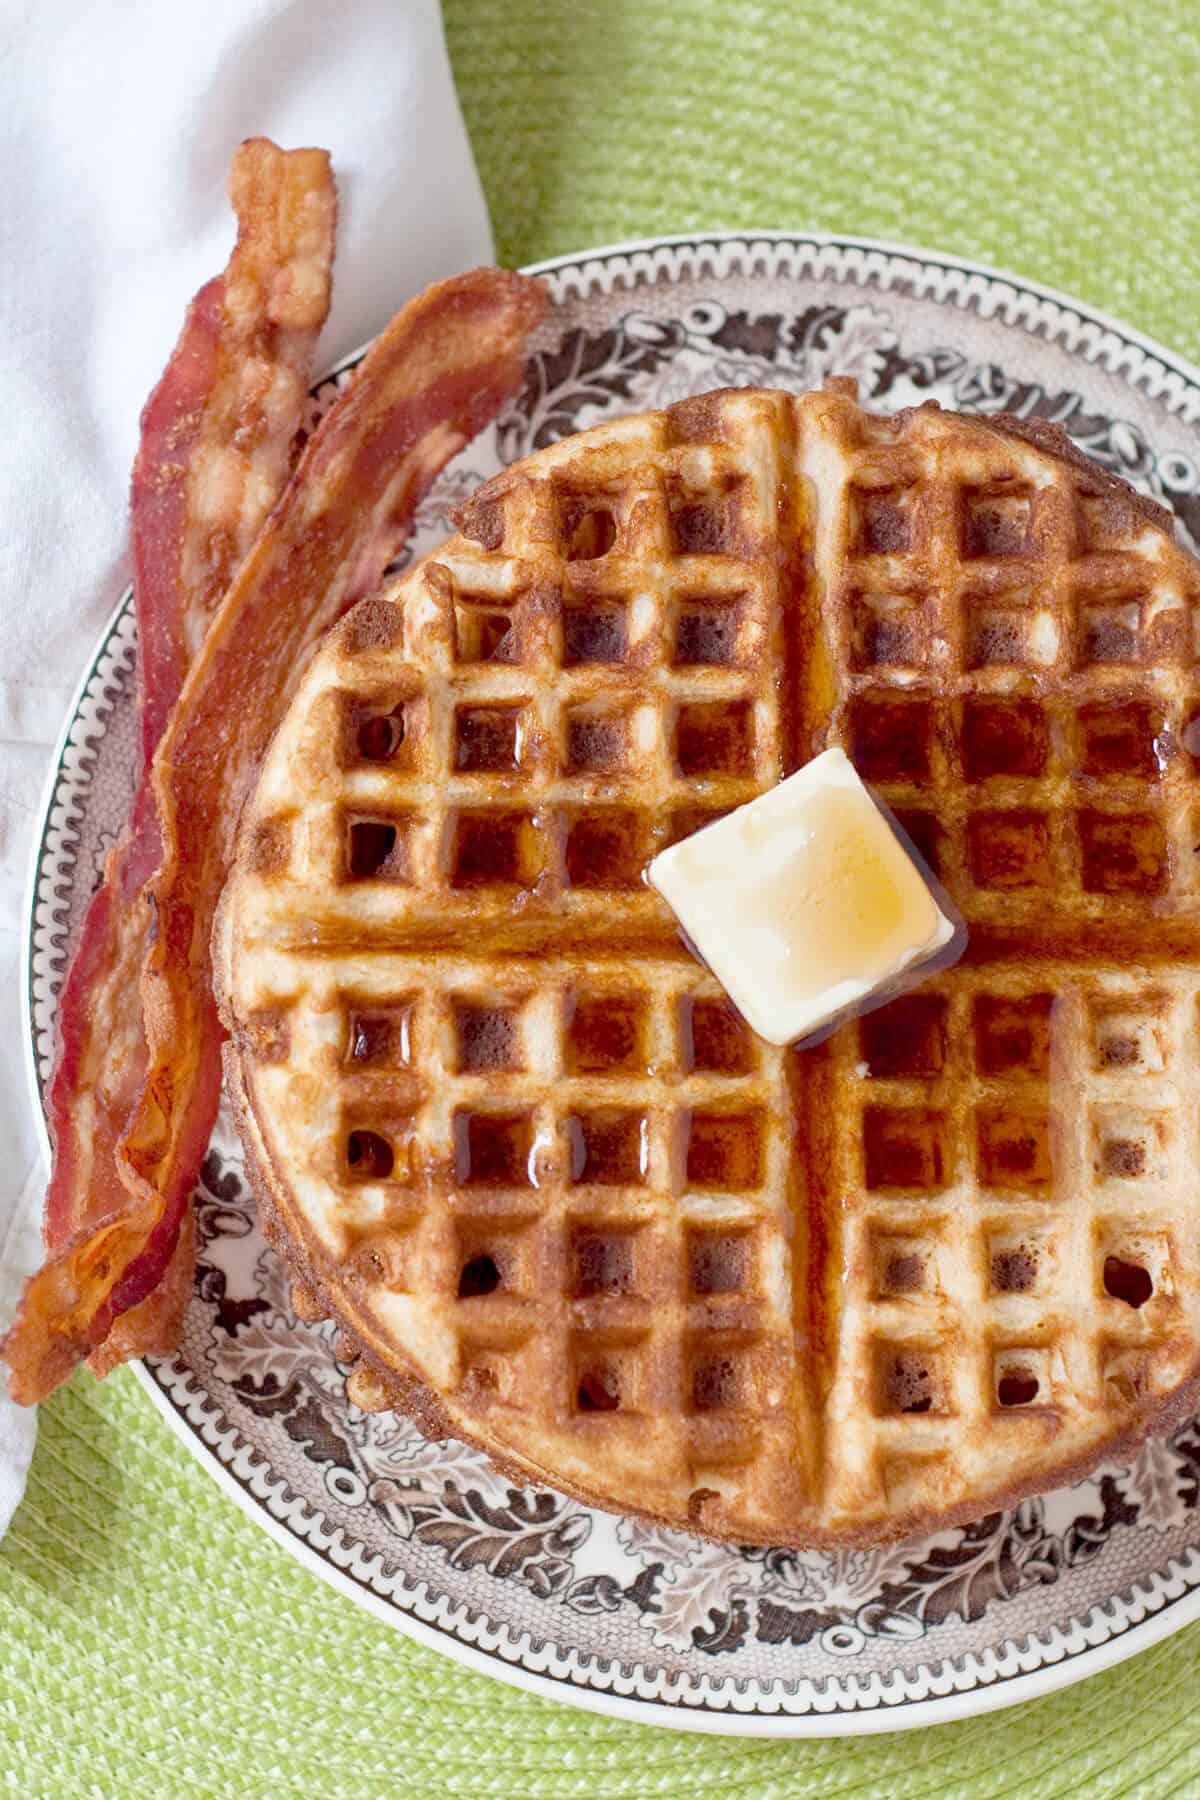 A stack of waffles with butter and syrup on top, bacon on the side.